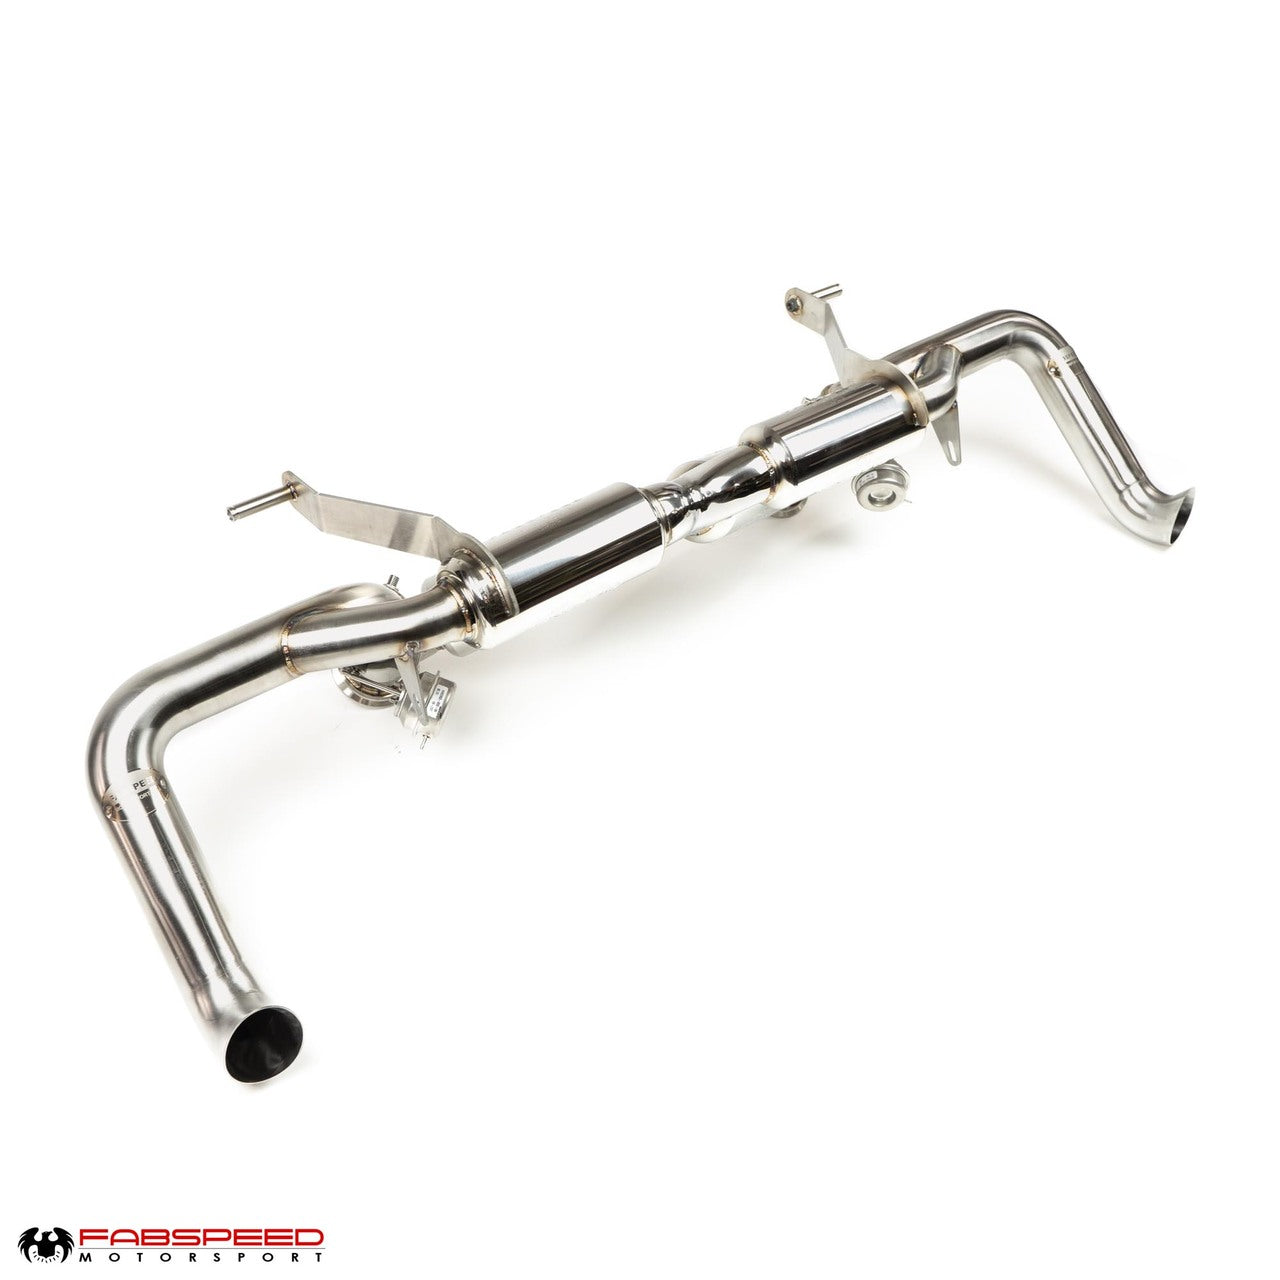 Fabspeed Audi R8 V10 Valvetronic Supersport X-Pipe Exhaust System (2019+)